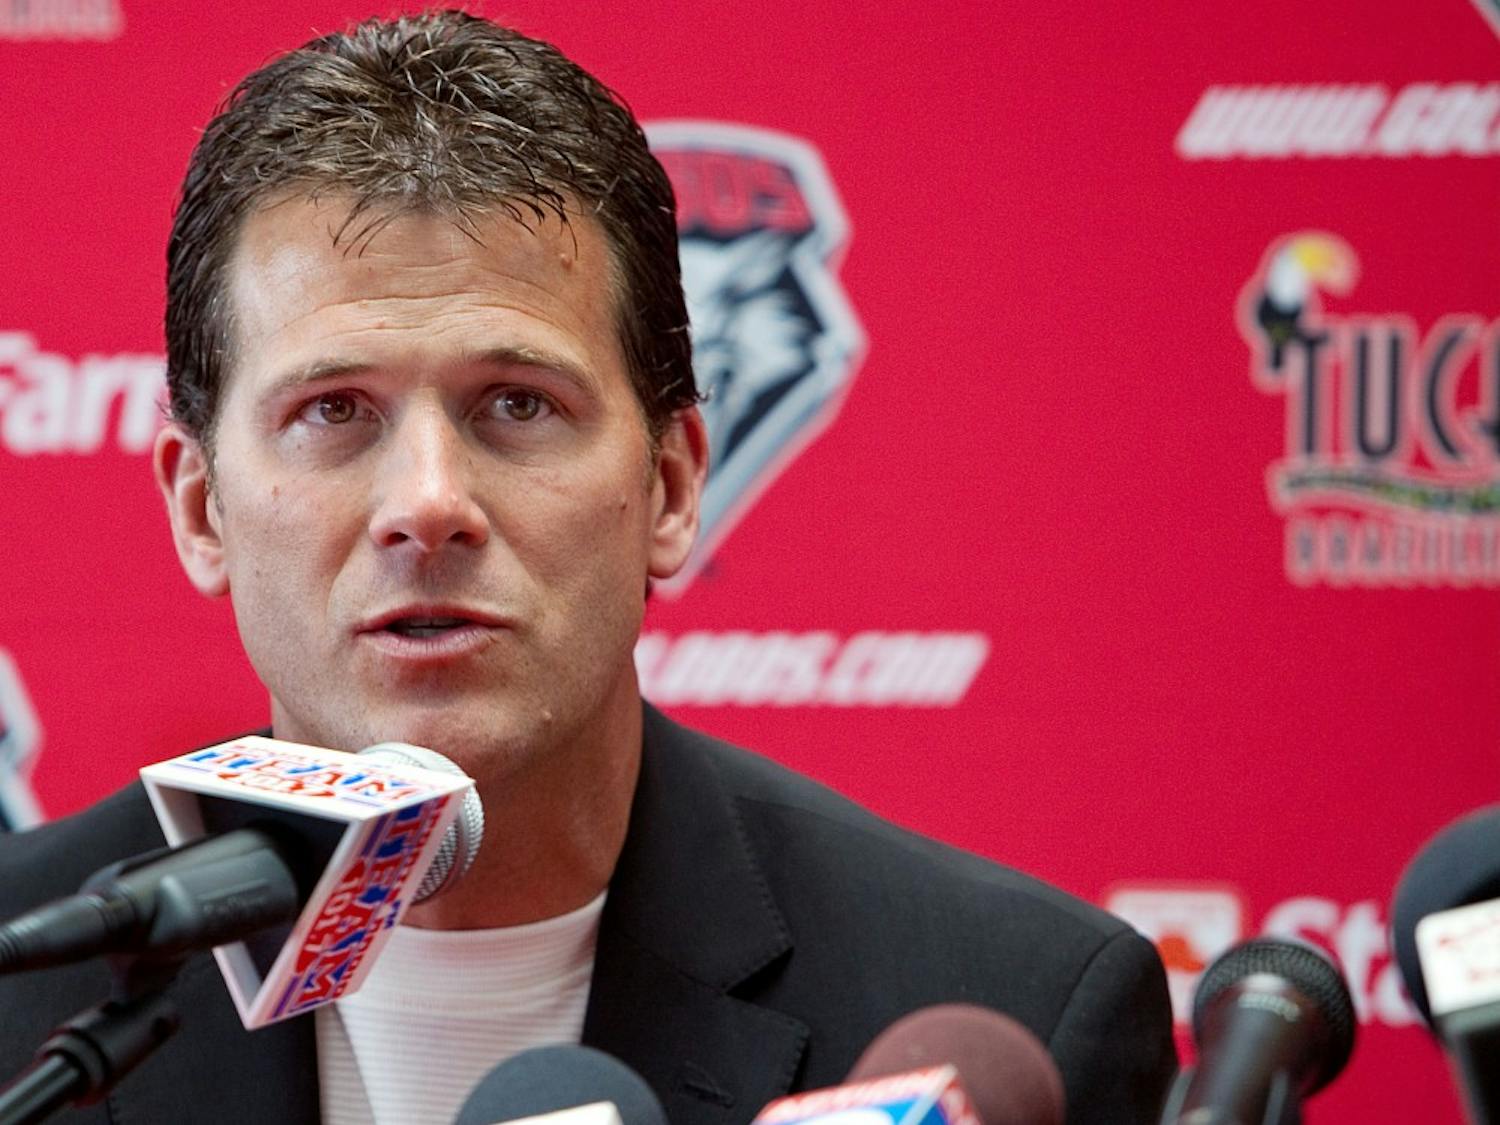 	UNM head basketball coach Steve Alford talks to the press July 20. Athletics Director Paul Krebs discussed Alford’s contract extension, which will keep the head coach
through the 2019-20 season.